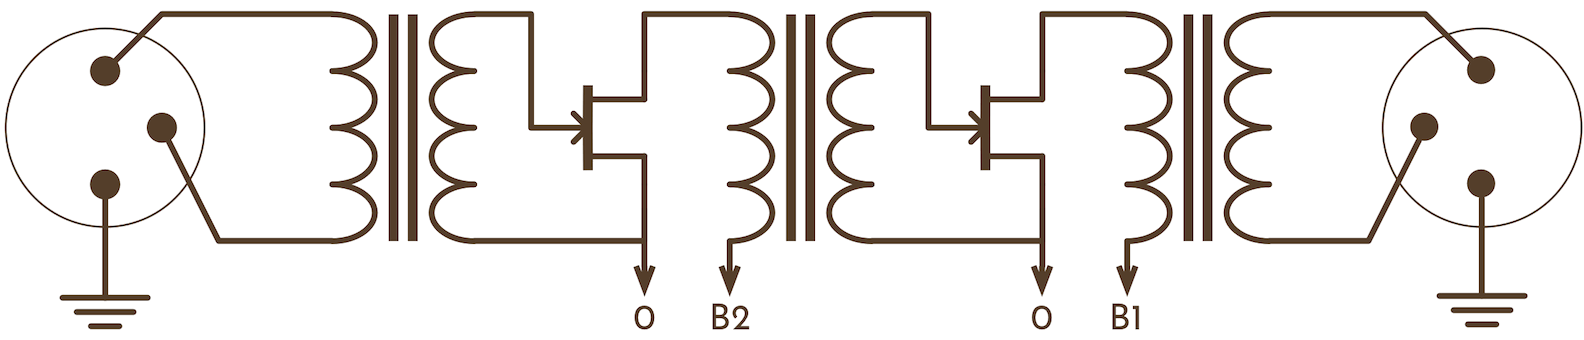 a simplified 2-stage studio amplifier schematic